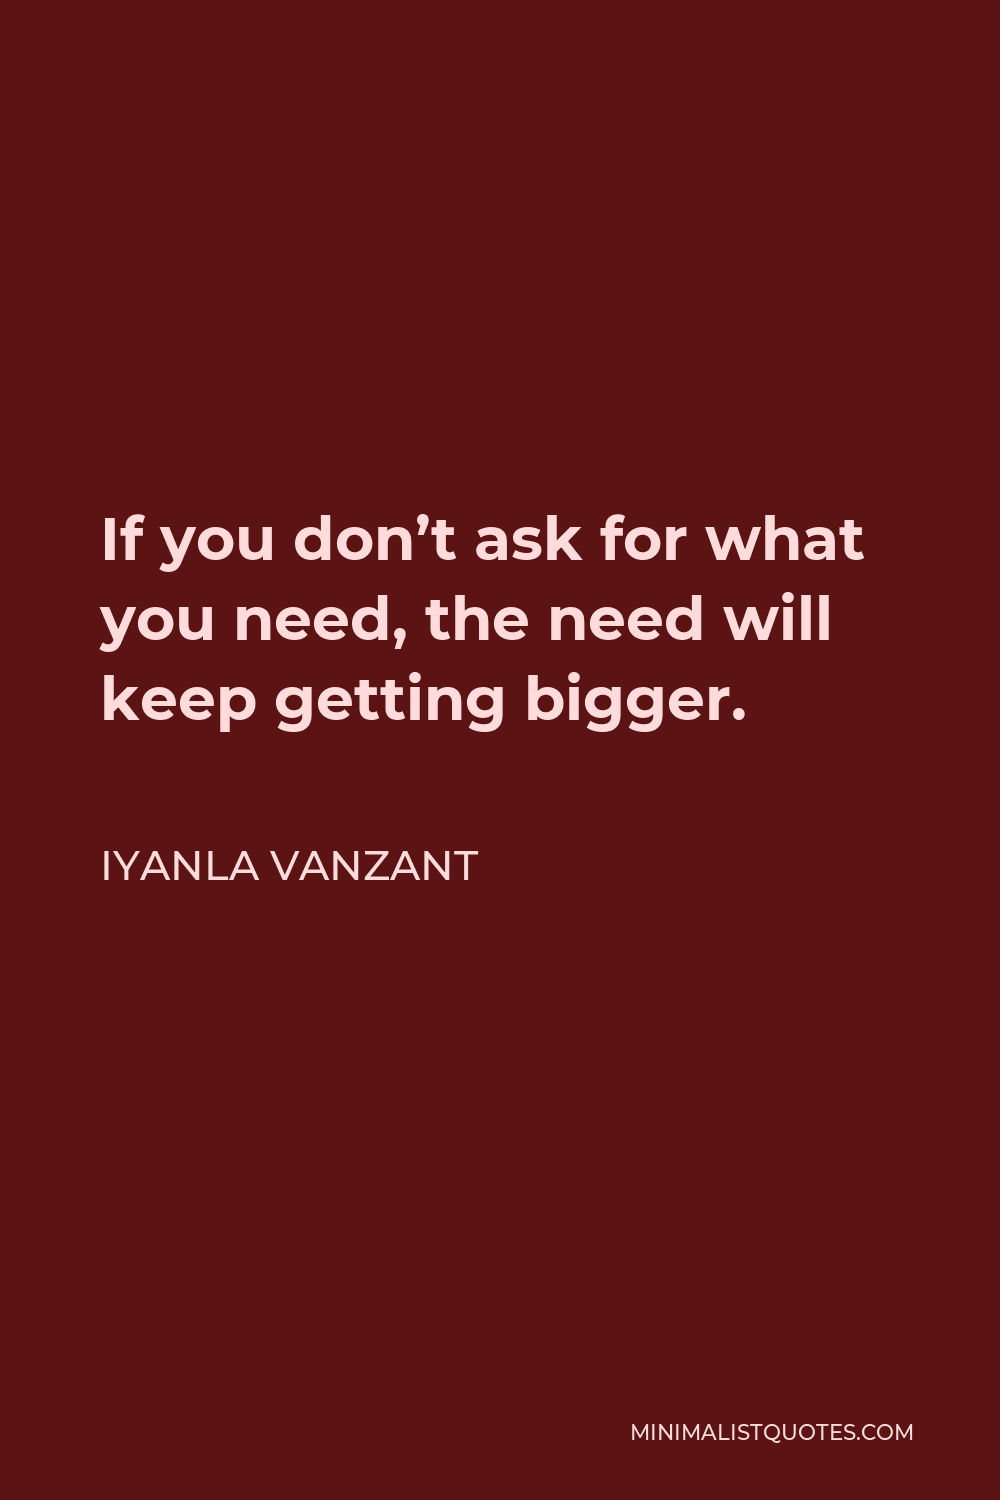 Iyanla Vanzant Quote - If you don’t ask for what you need, the need will keep getting bigger.